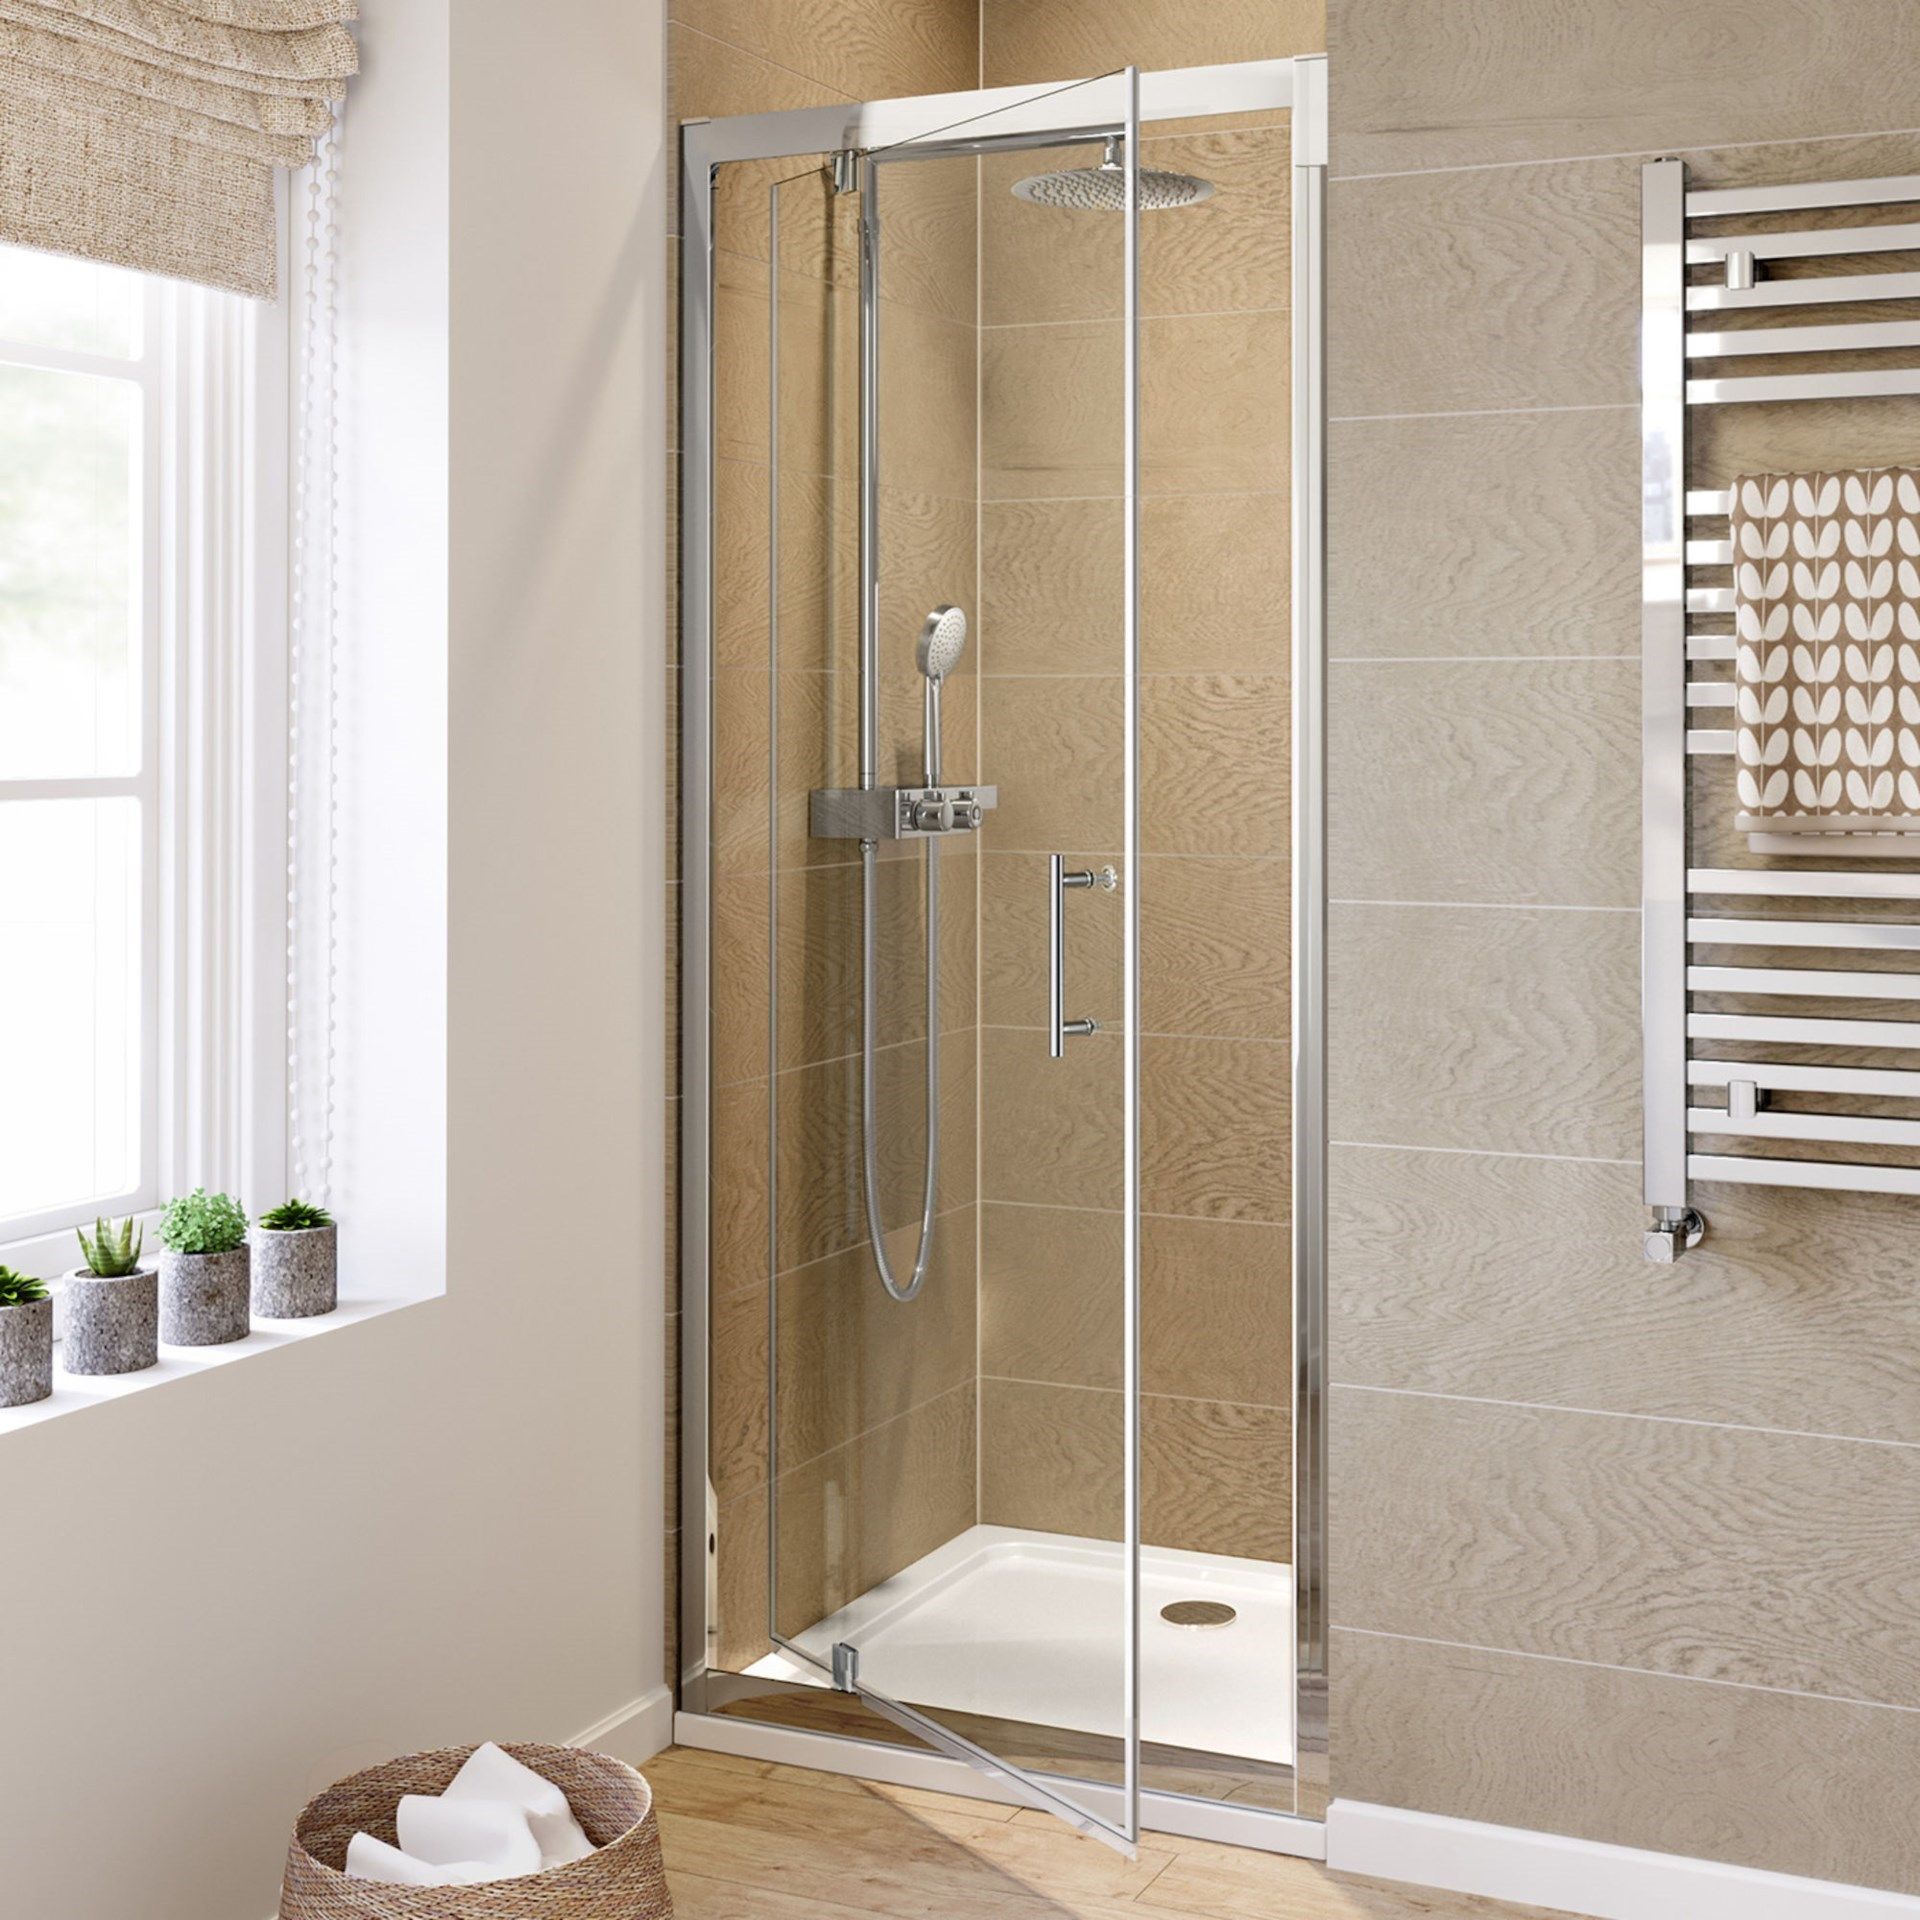 Brand New Twyfords 700mm - 6mm - Premium Pivot Shower Door. RRP £339.99.8mm Safety Glass Fully water - Image 2 of 3